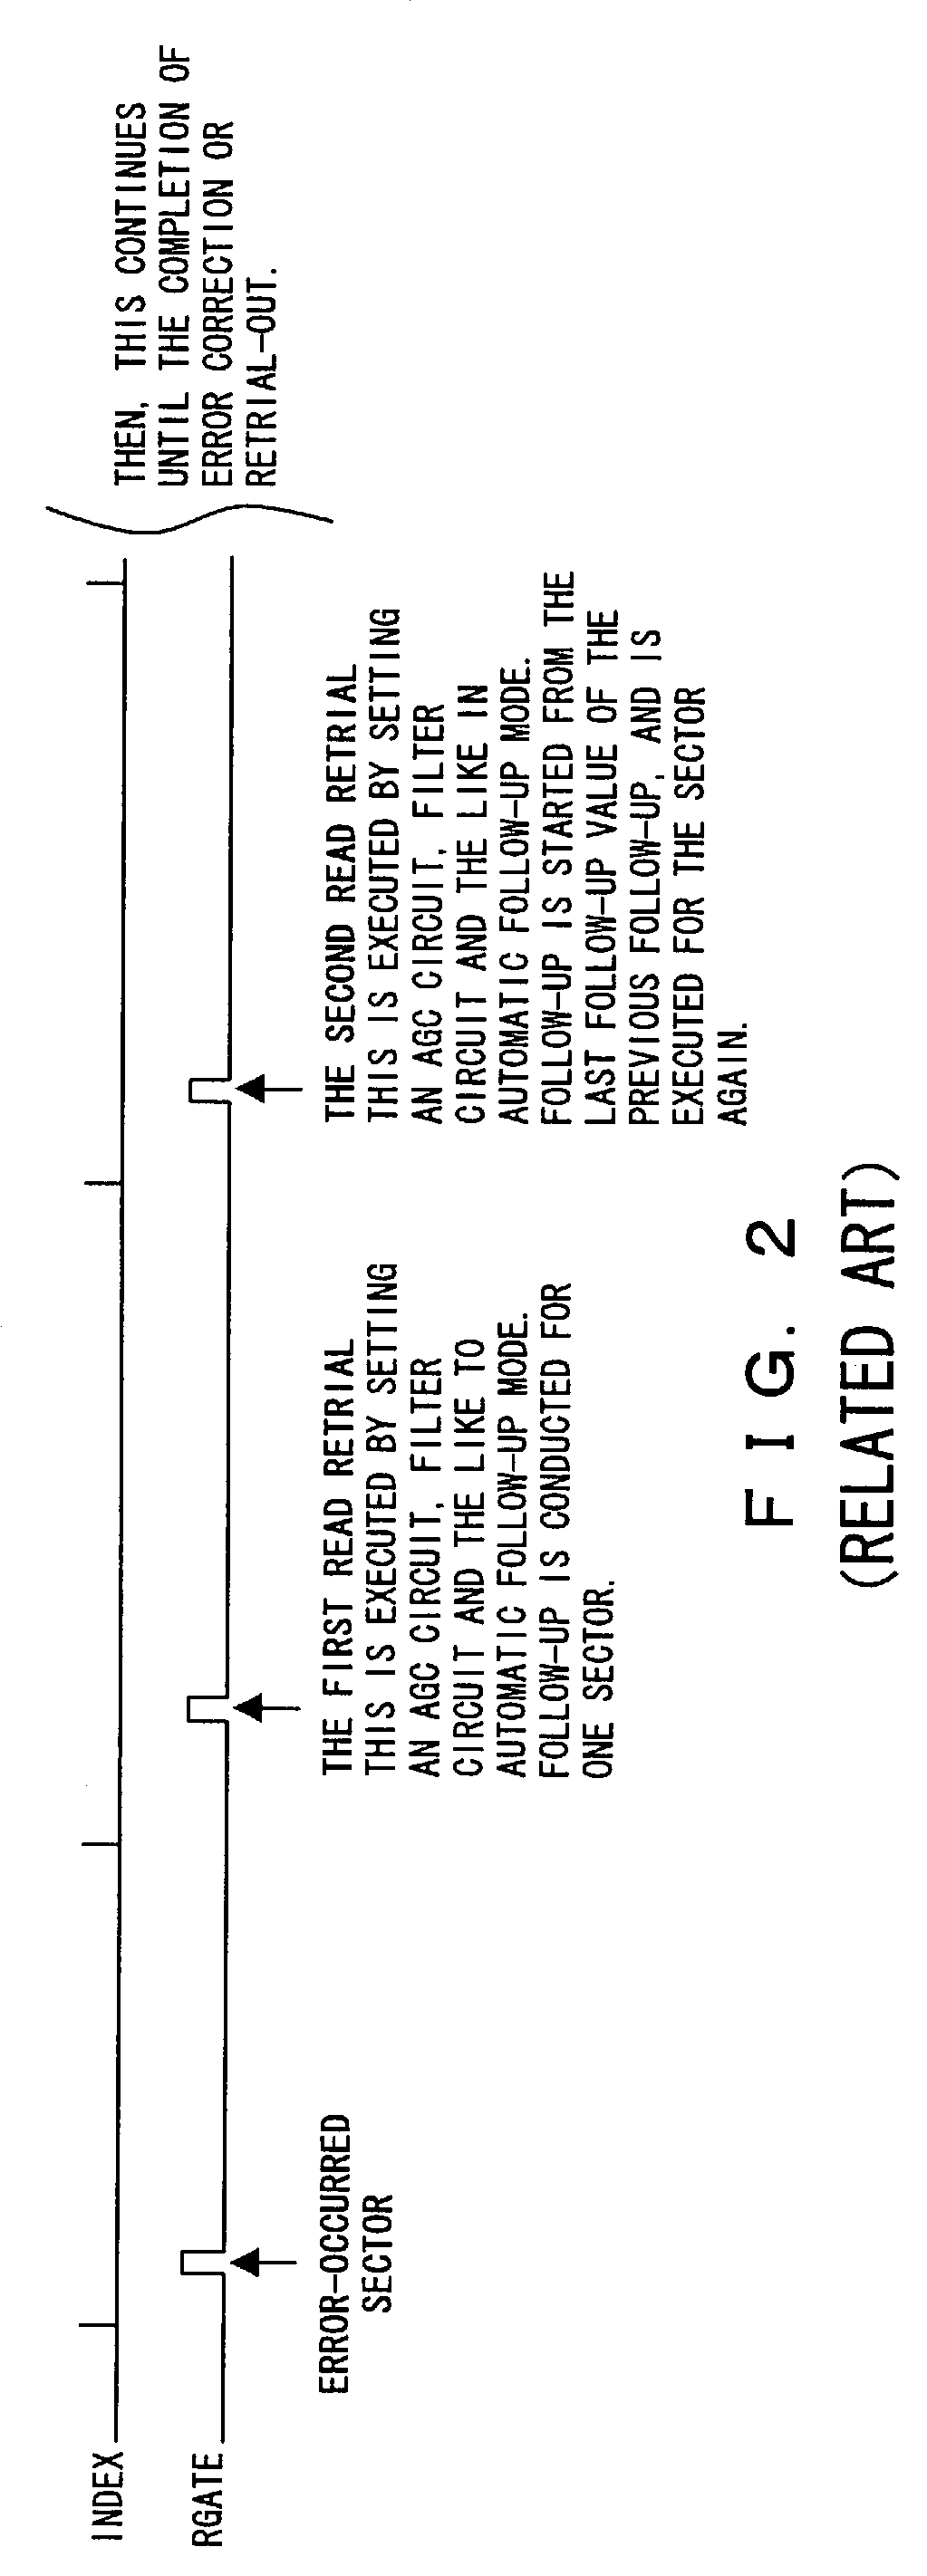 Data read device, read method and circuit controlling read device